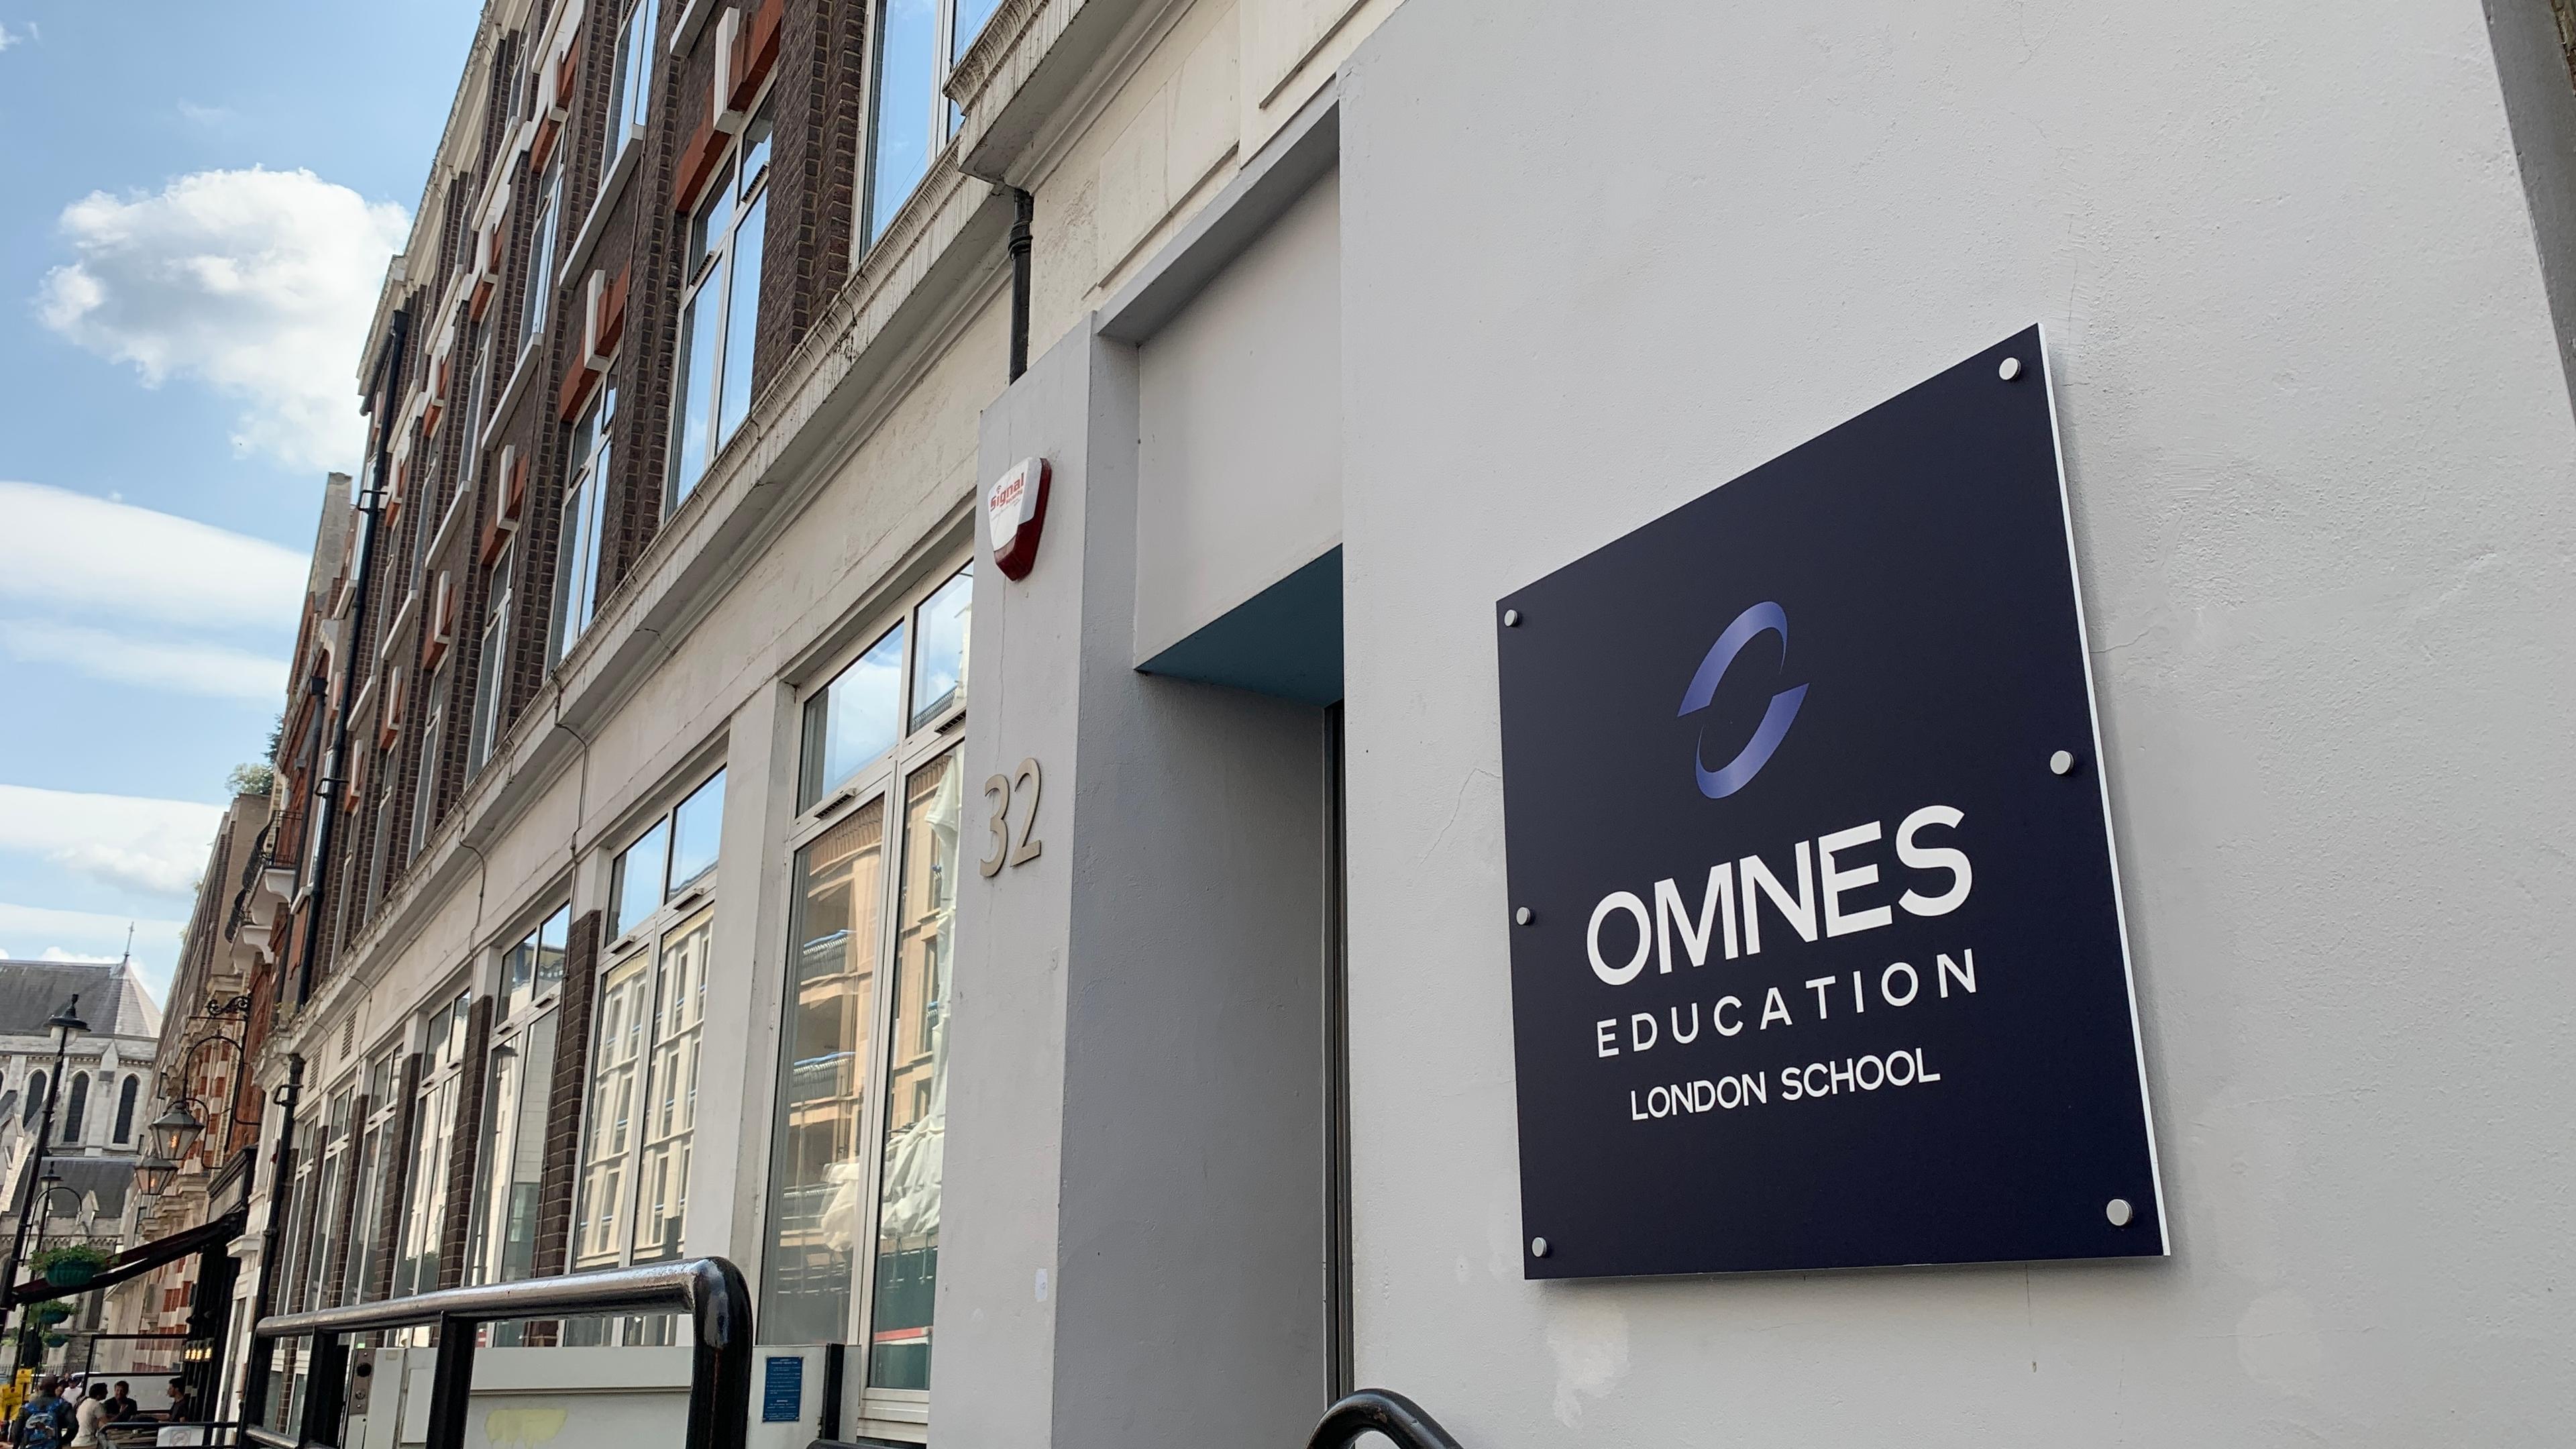 Classrooms Up To 60, OMNES Education London School photo #5